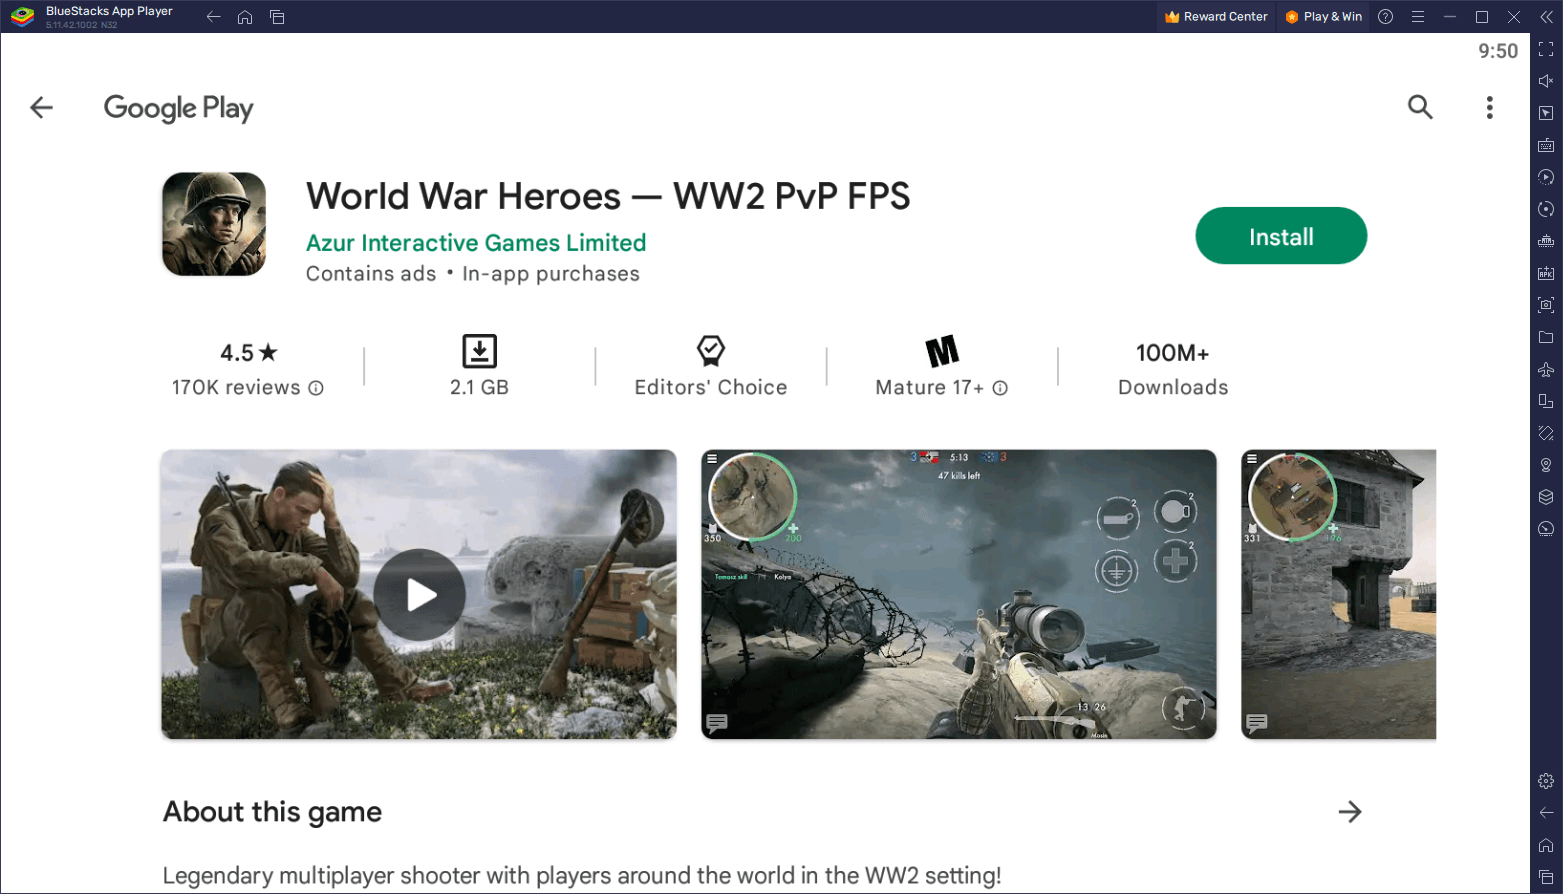 How to Play World War Heroes — WW2 PvP FPS on PC with BlueStacks